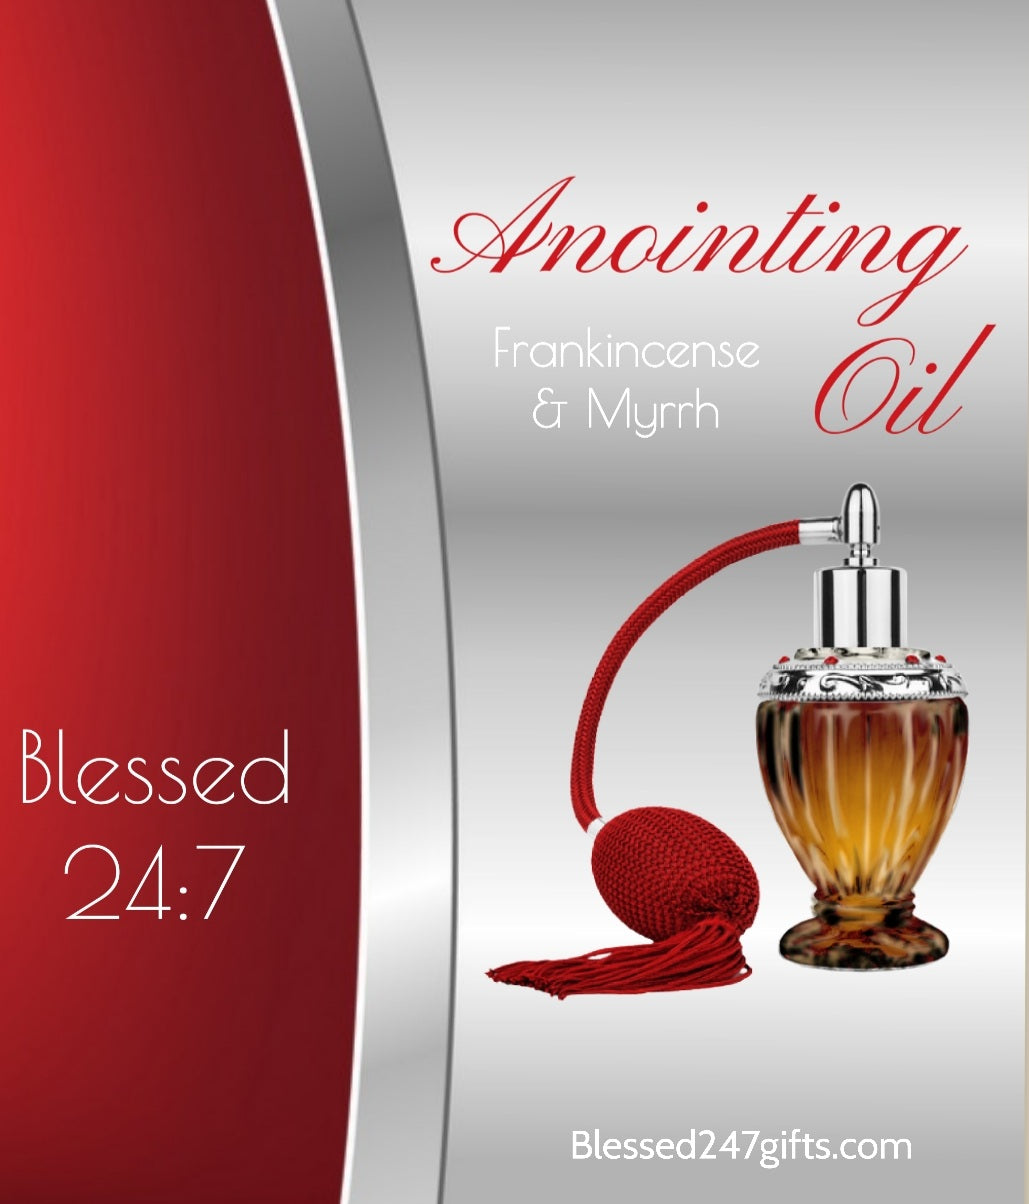 Blessed 24:7 Anointing Oil (Frankincense & Myrrh) Antique Style Spray Bottle (Red) FREE SHIPPING